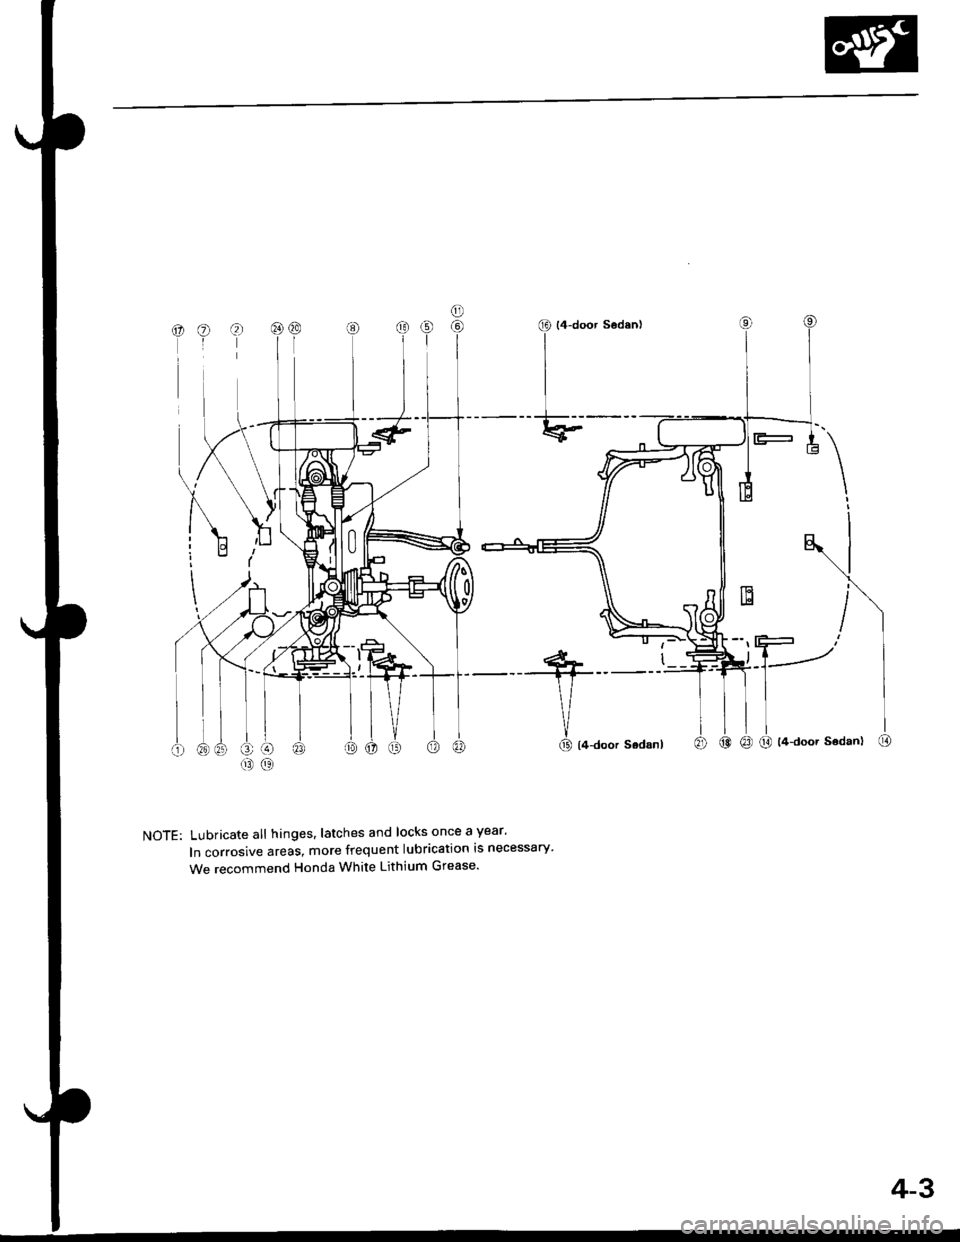 HONDA CIVIC 1997 6.G Manual PDF NOTE: Lubricate all hinges, latches and locks once a year
ln corrosive areas, more frequent lubrication is necessary
We recommend Honda White Lithium Grease
4-3 